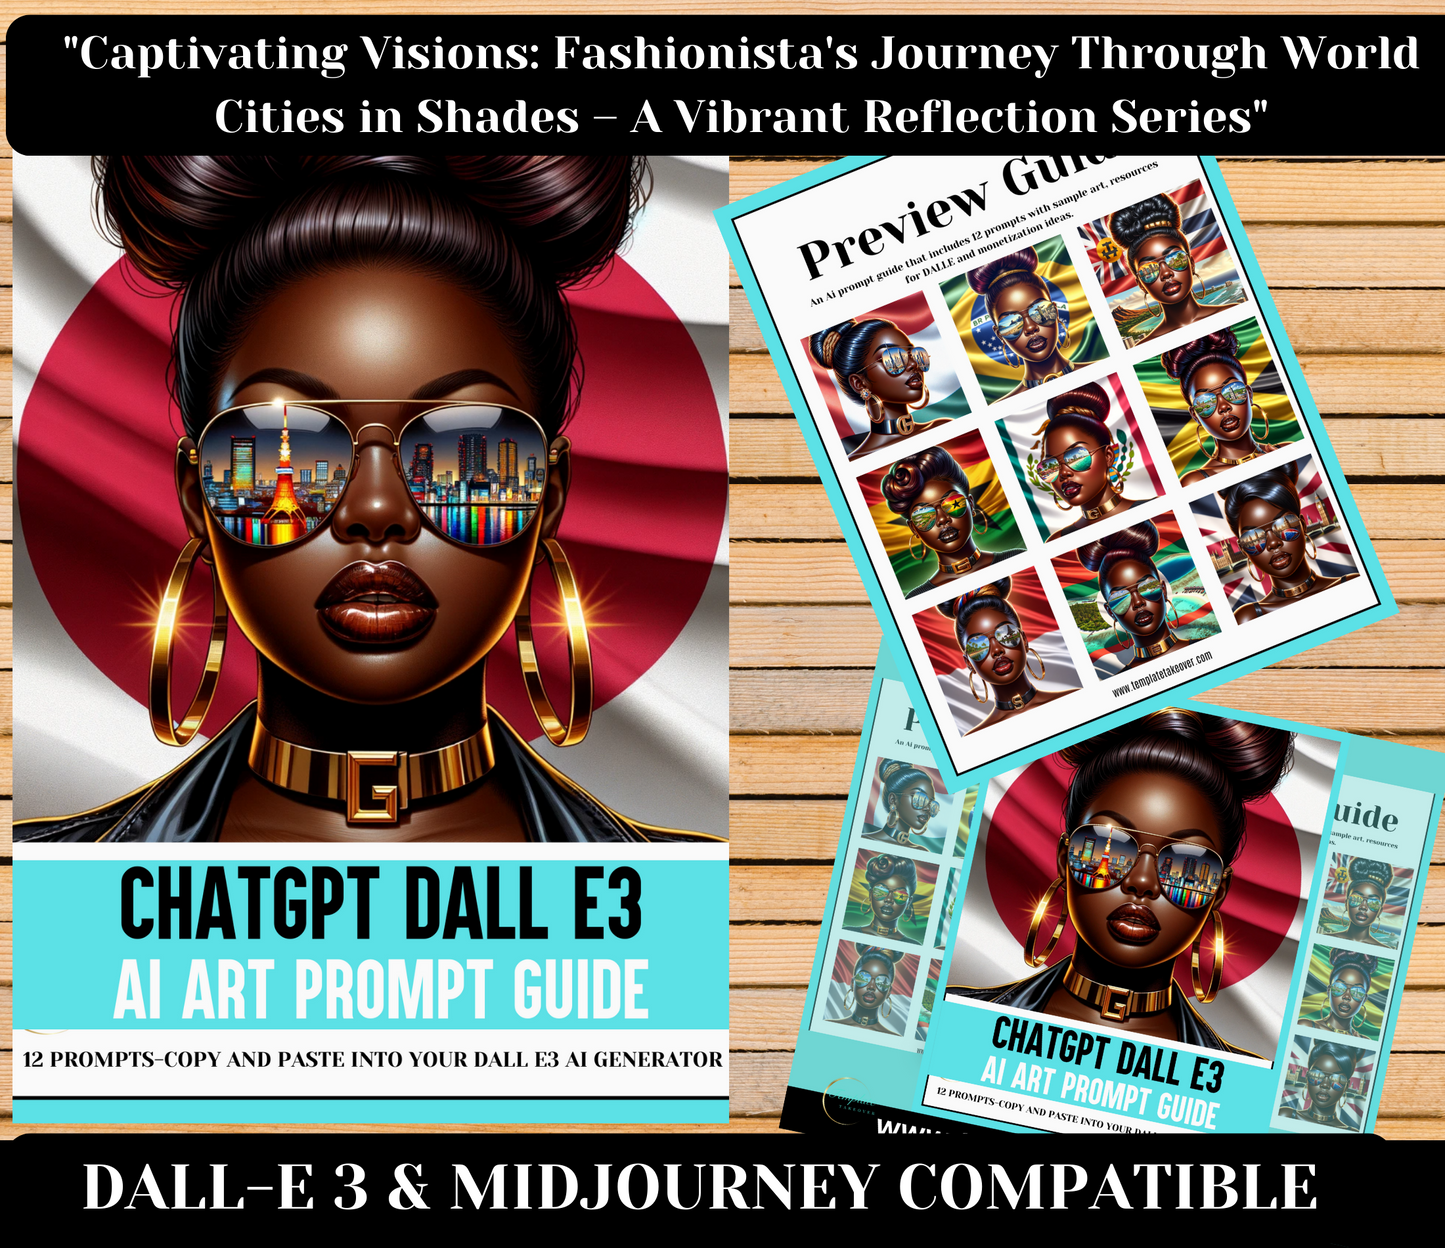 "Captivating Visions: Fashionista's Journey Through World Cities in Shades – A Vibrant Reflection Series"